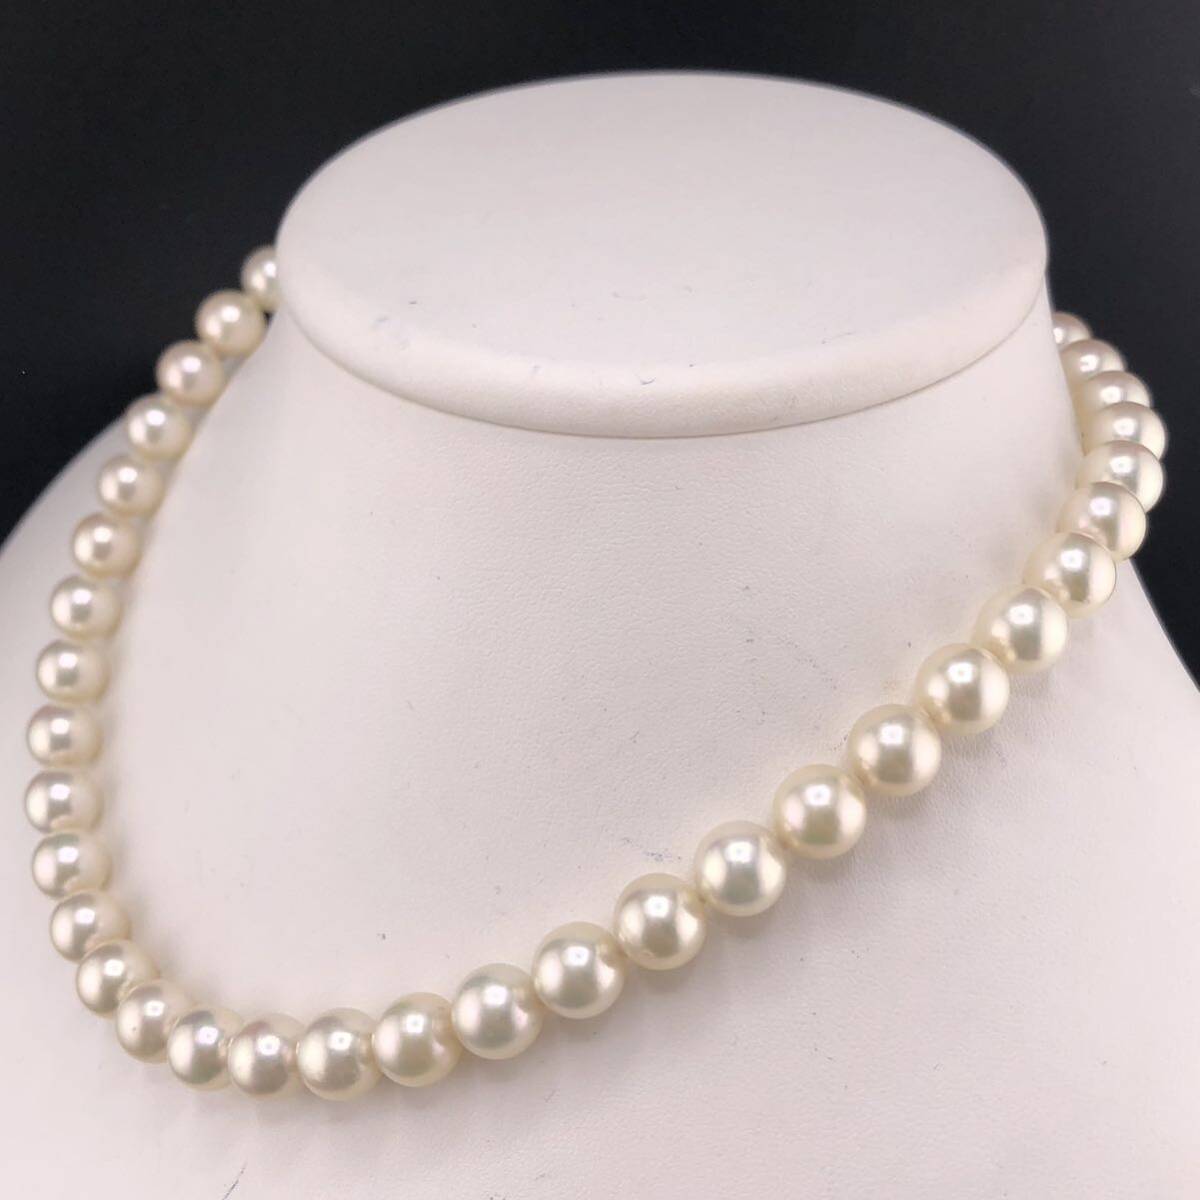 E04-5742 大玉☆アコヤパールネックレス 9.0mm~9.5mm 40cm 53g ( アコヤ真珠 Pearl necklace K14WG )の画像2